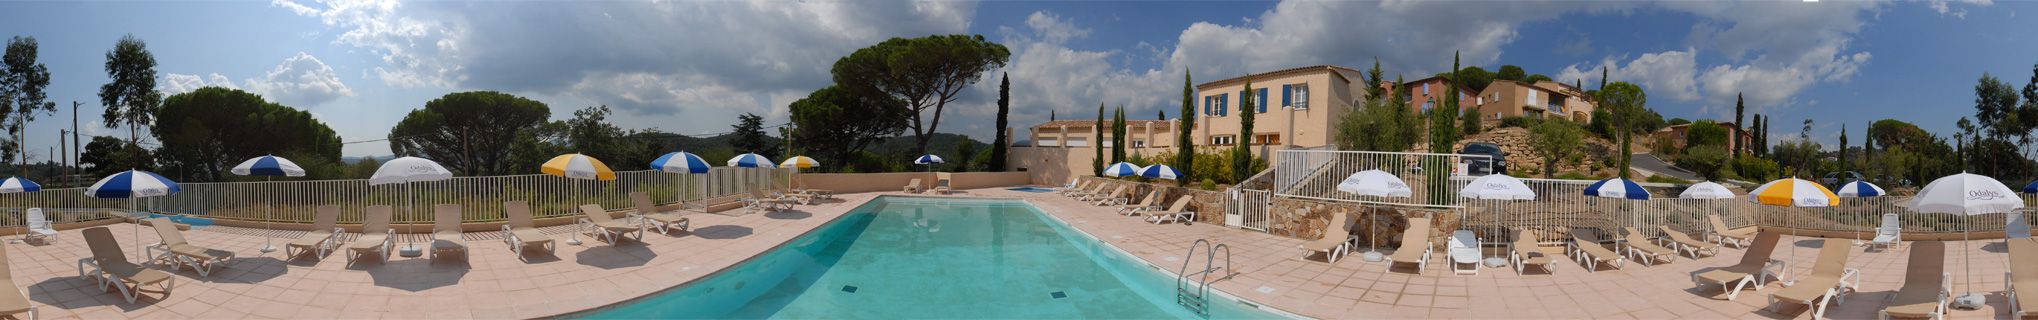 Grimaud - Les Bastides de Grimaud : Swimming pool of the residence